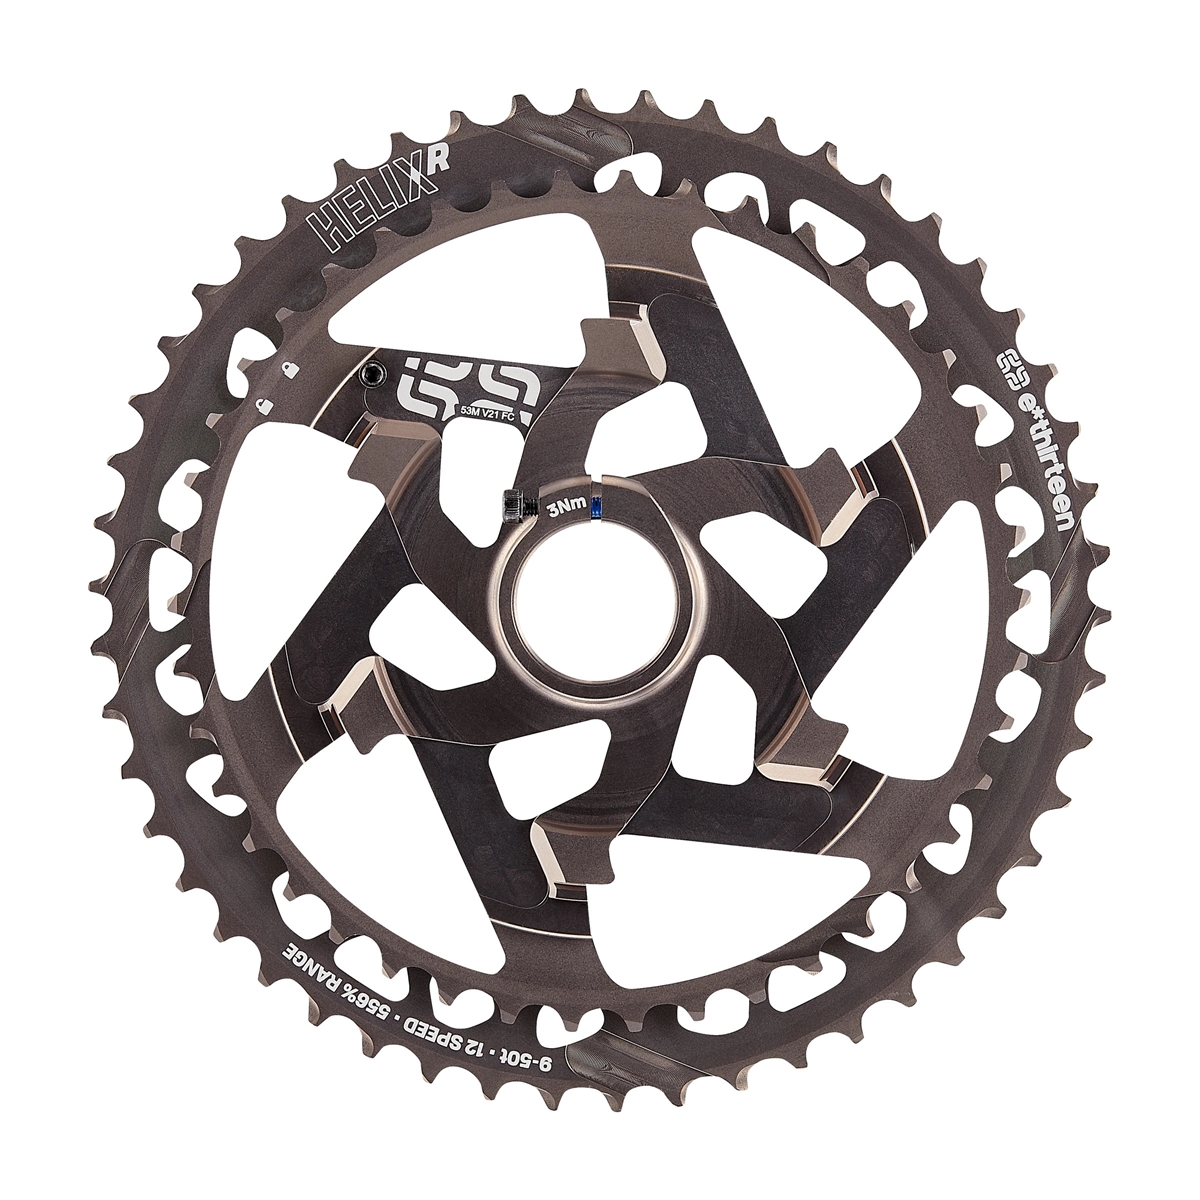 Helix Race 12s Cassette Replacement Cluster 42-50T SRAM XD/XDR Grey